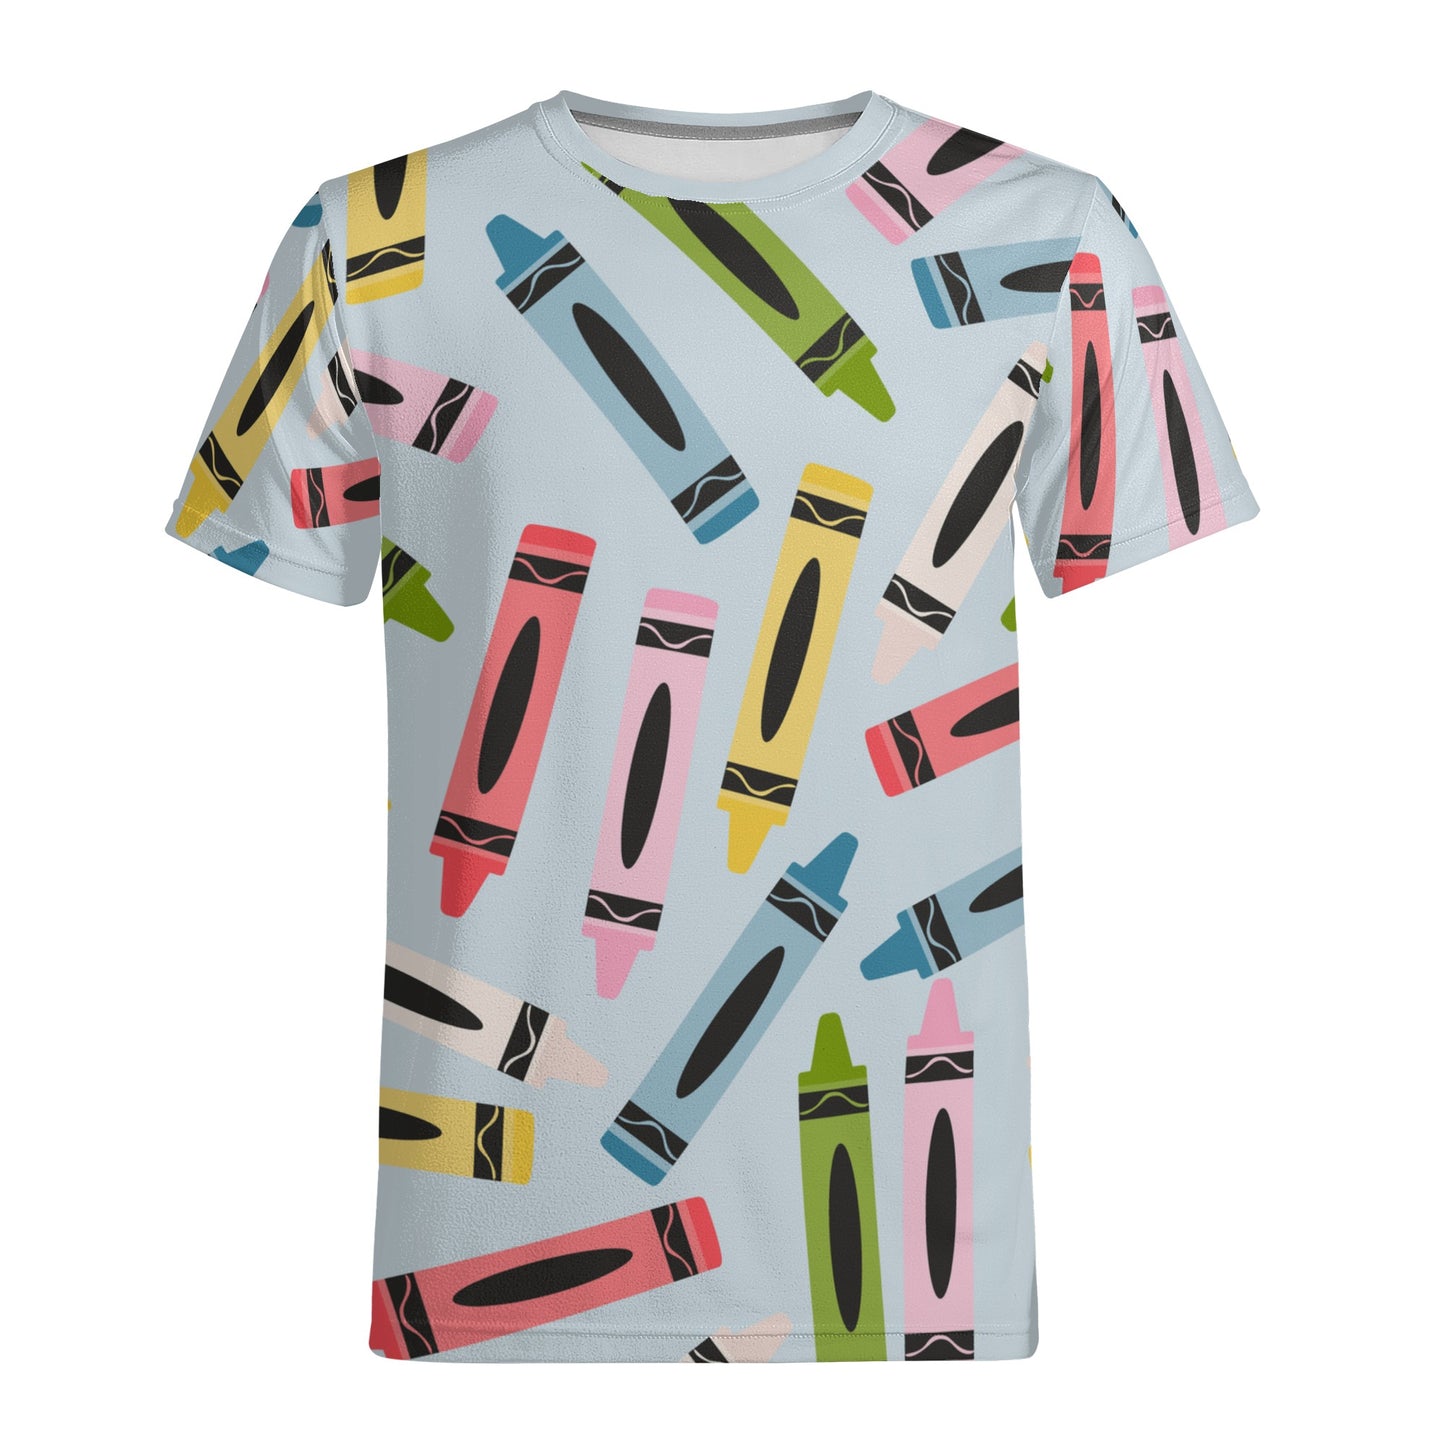 Cute Crayons Graphic Tee